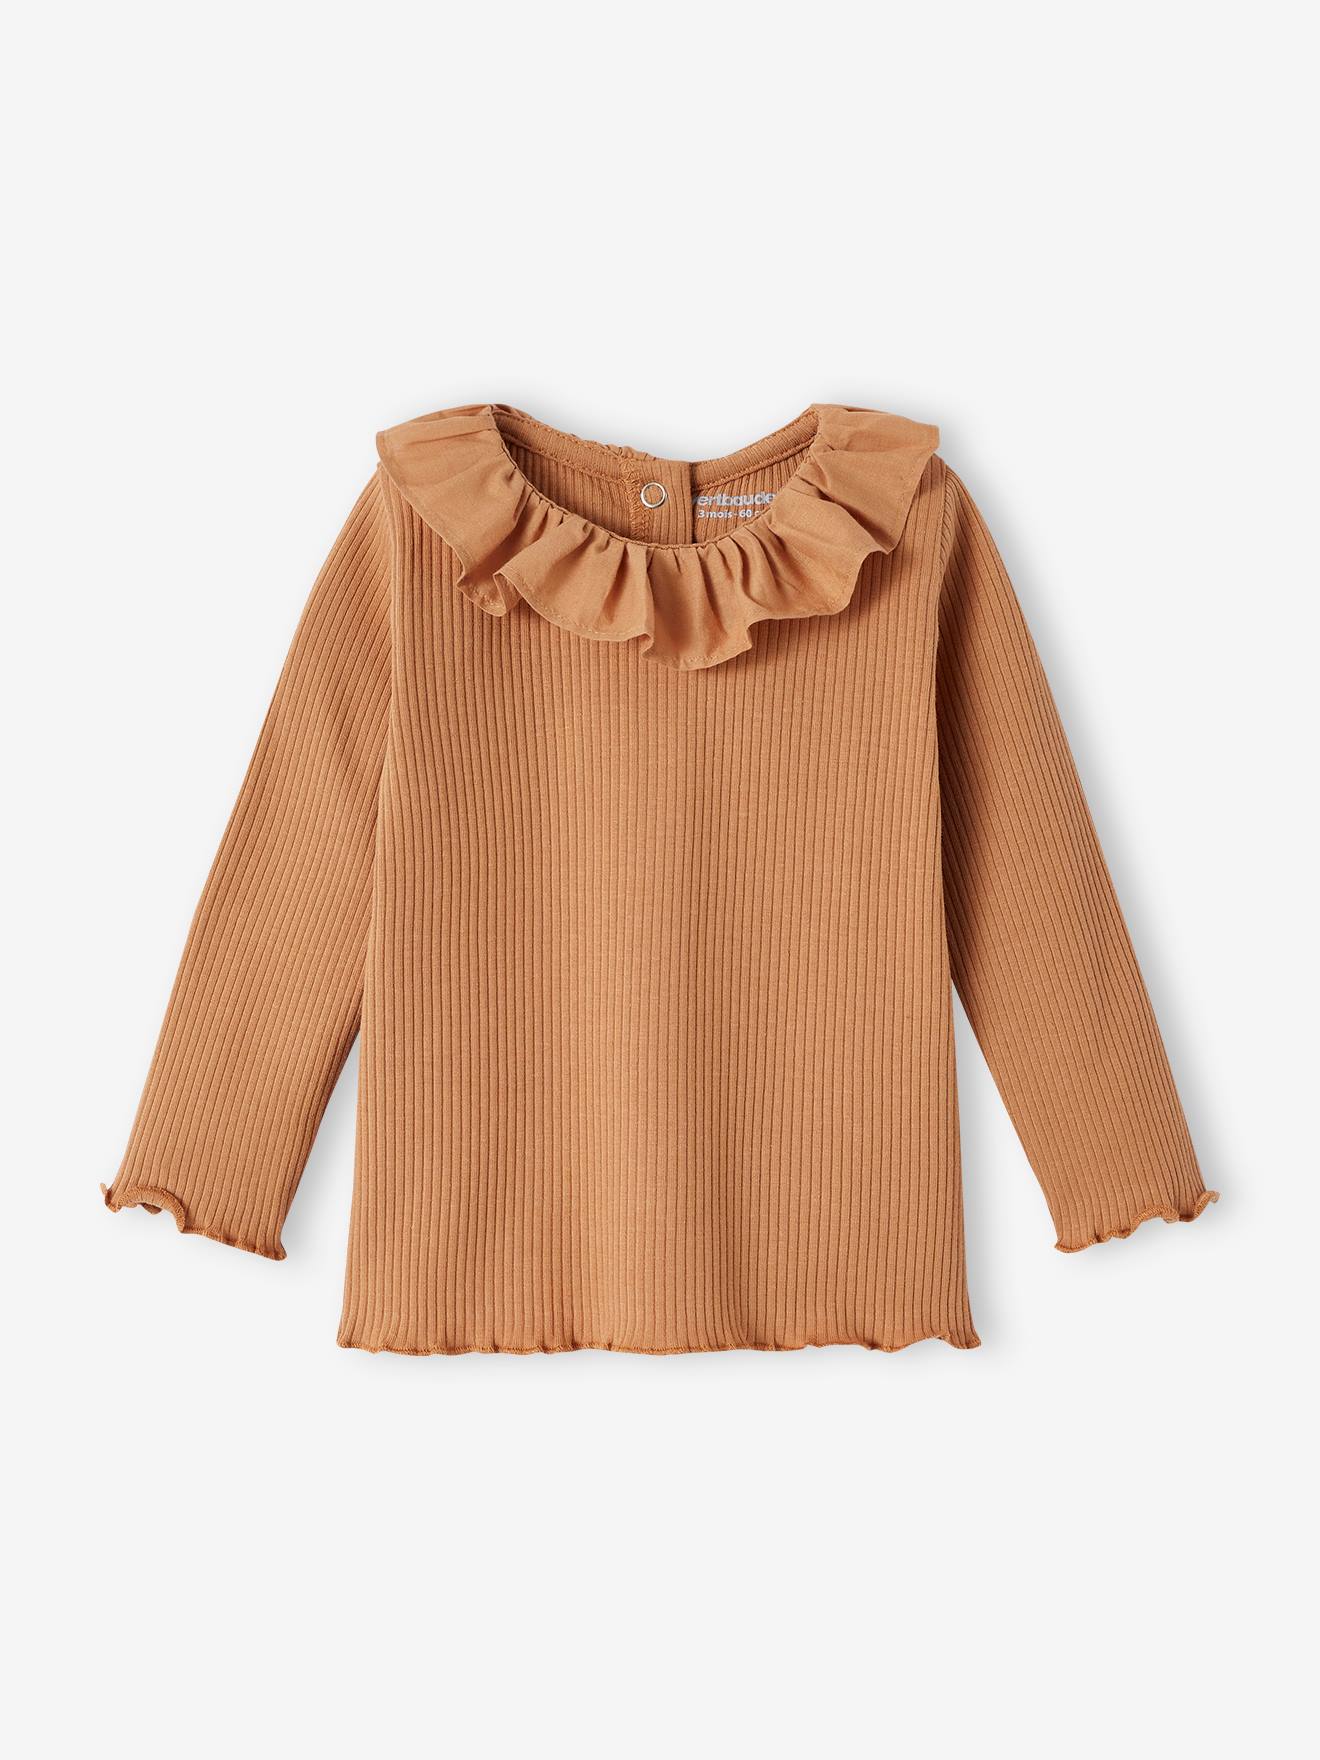 Open Neck Collared Rib Knit Sweater